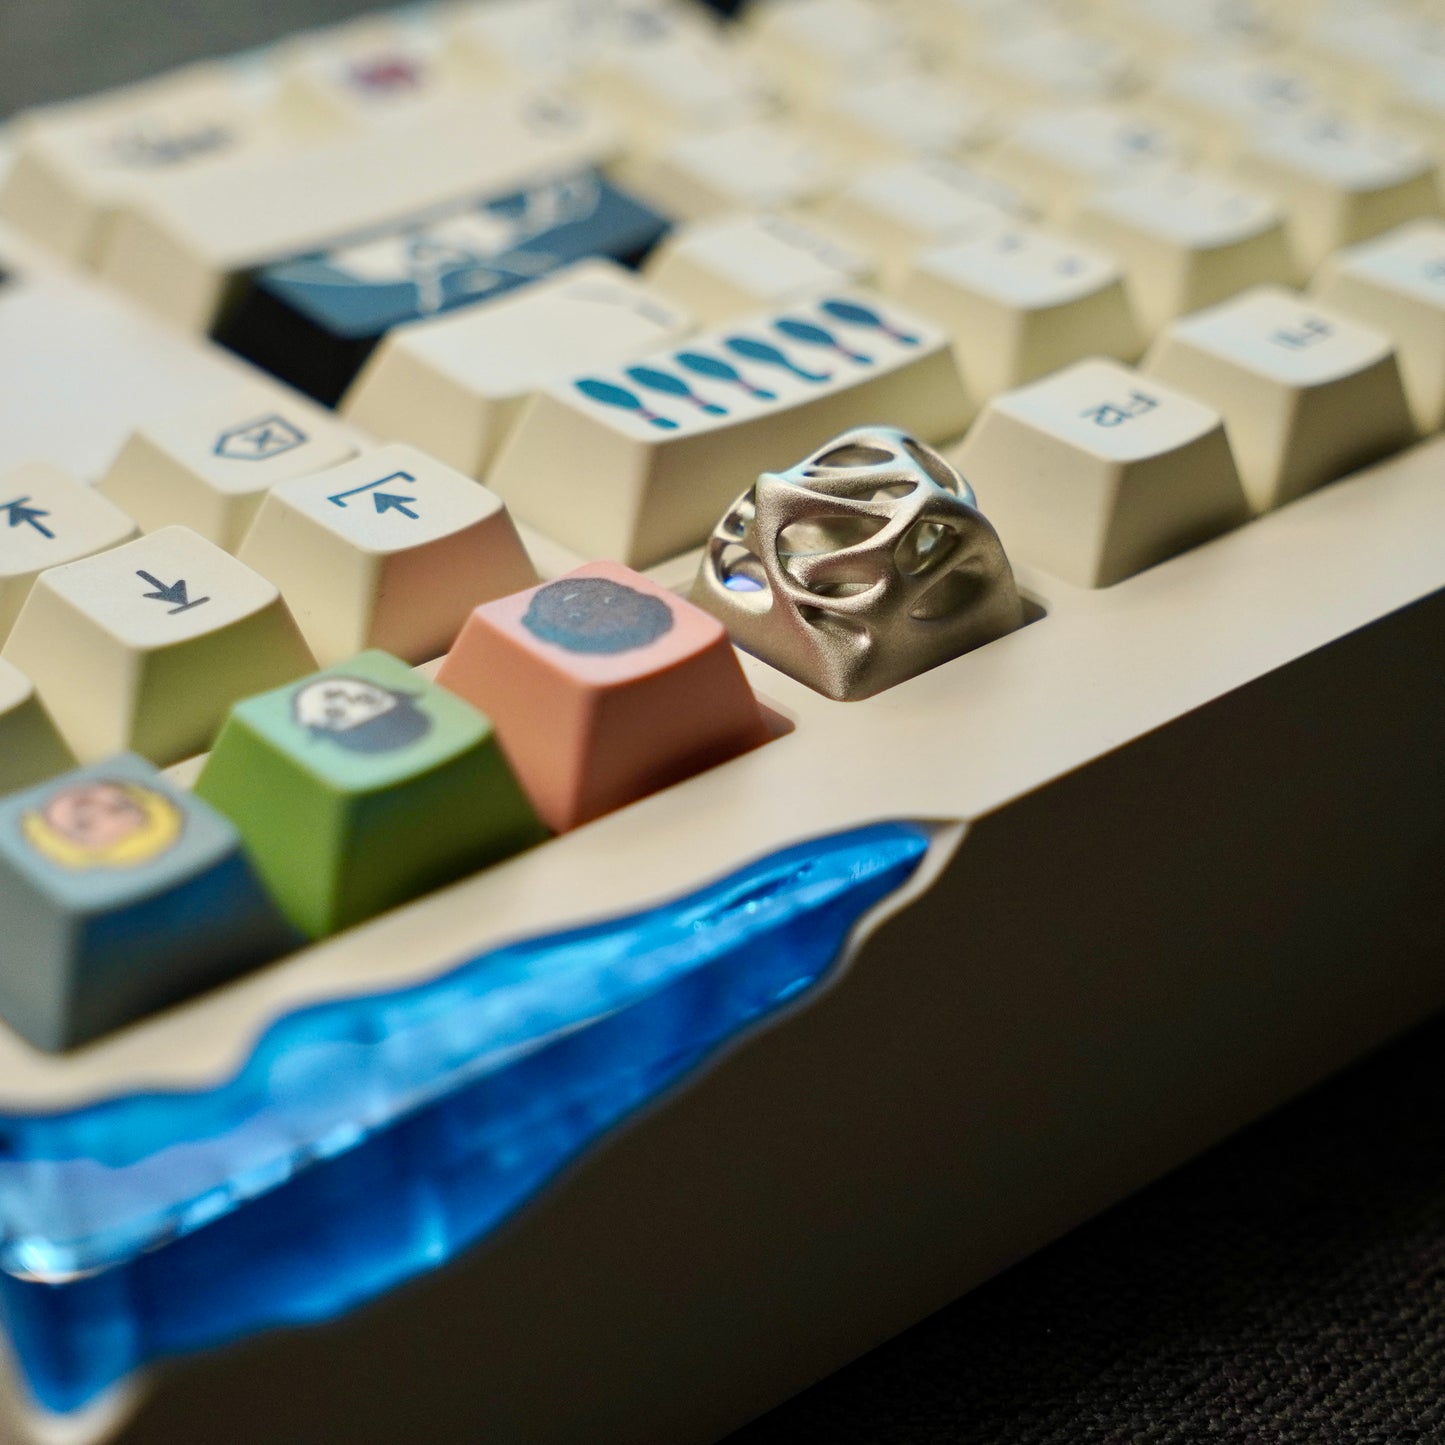 SILVER GRIND ARTISAN KEYCAP (FREE SHIPPING TO SOME COUNTRIES)